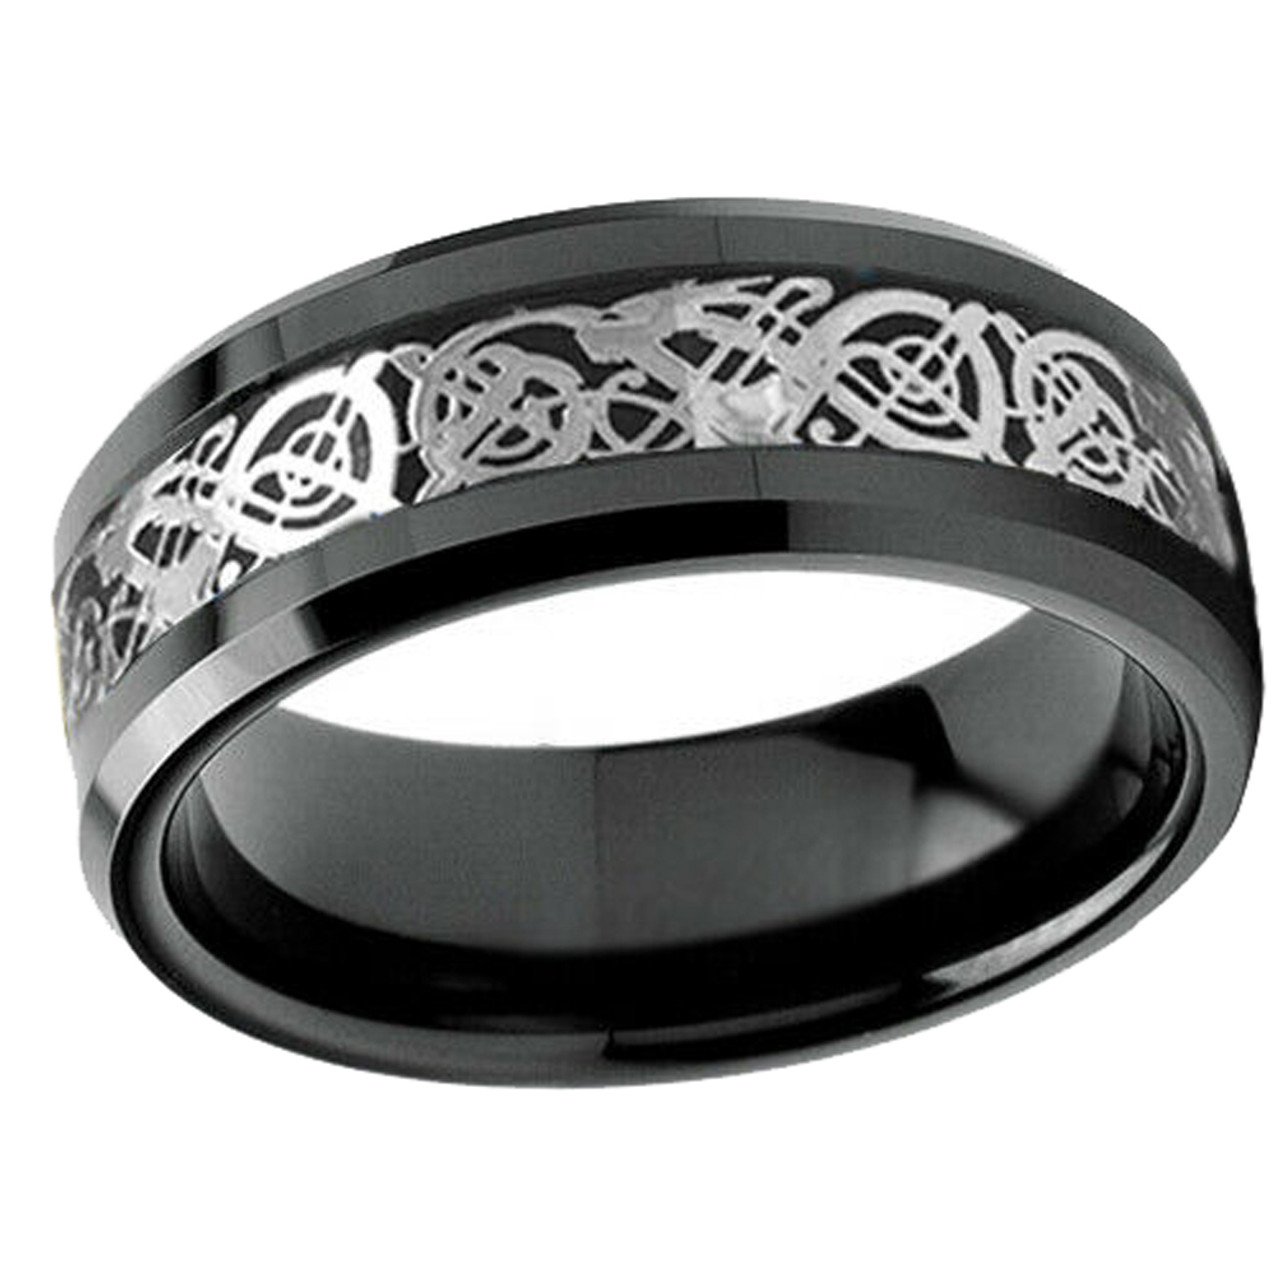 Unisex or Men's Tungsten Wedding Band (8mm). Black with Silver Celtic Wedding Band with Resin Inlay. Celtic Knot Tungsten Carbide Ring